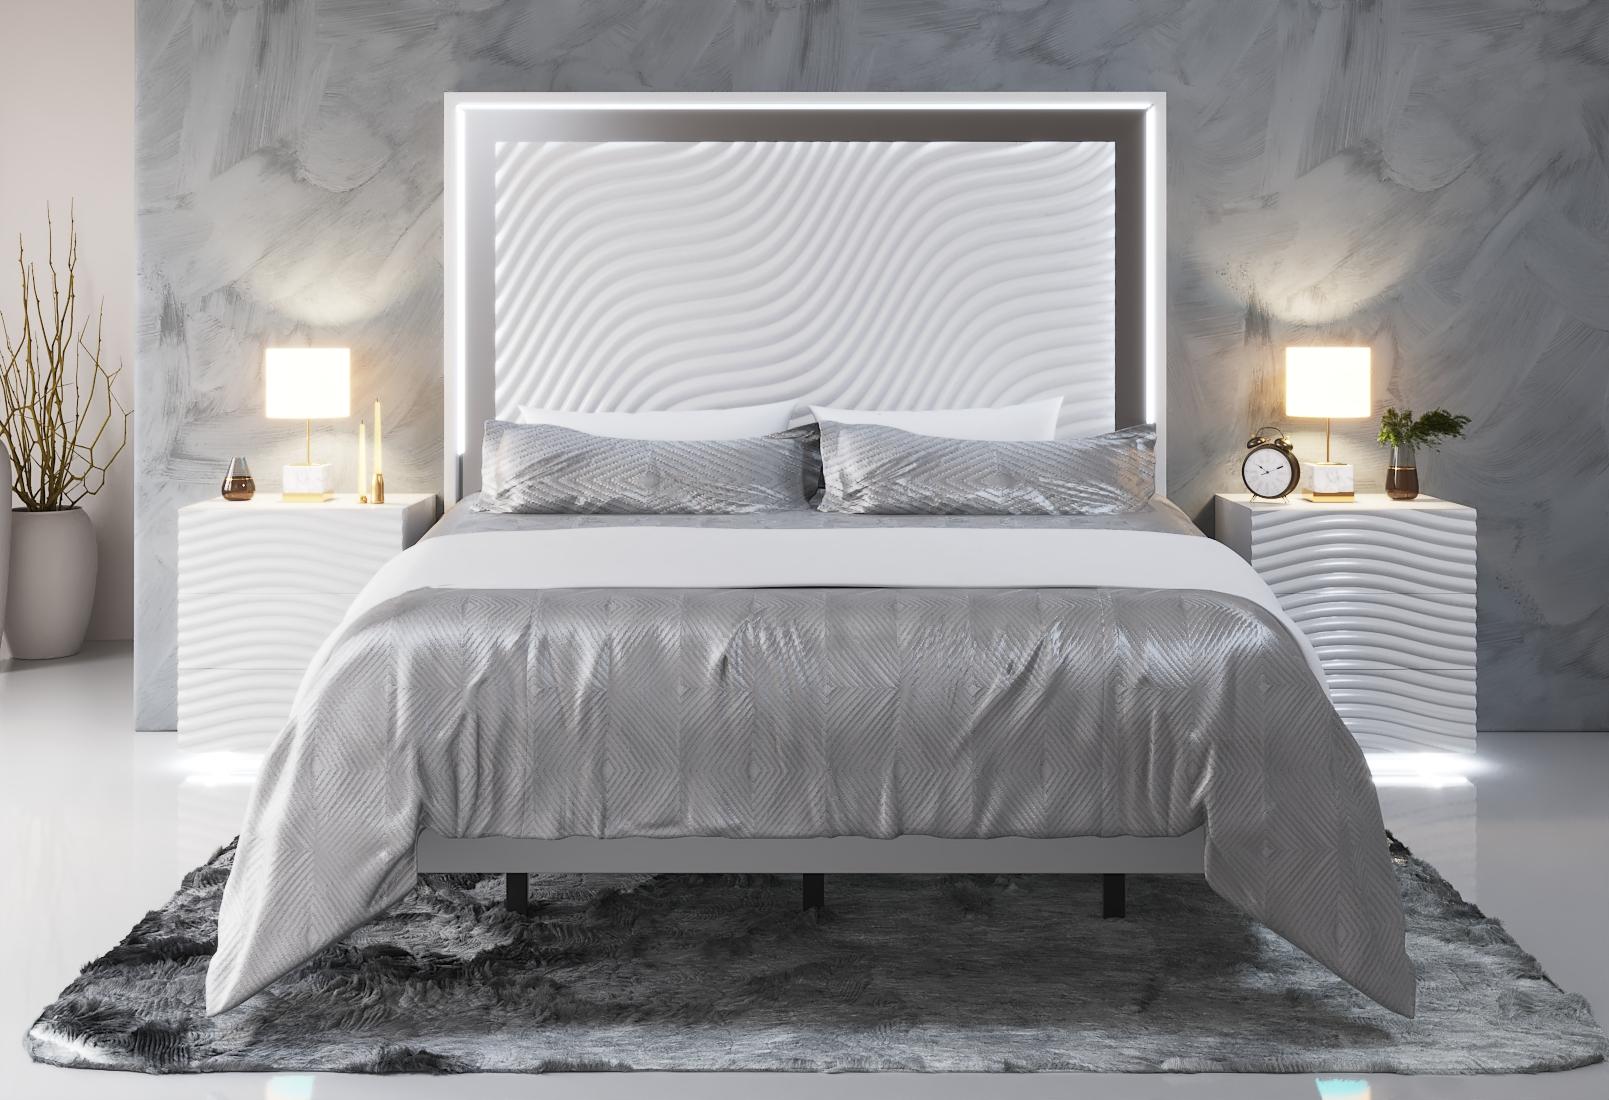 

    
Glam Shiny White Queen Bedroom Set 5 WAVE ESF Contemporary Modern MADE IN SPAIN
